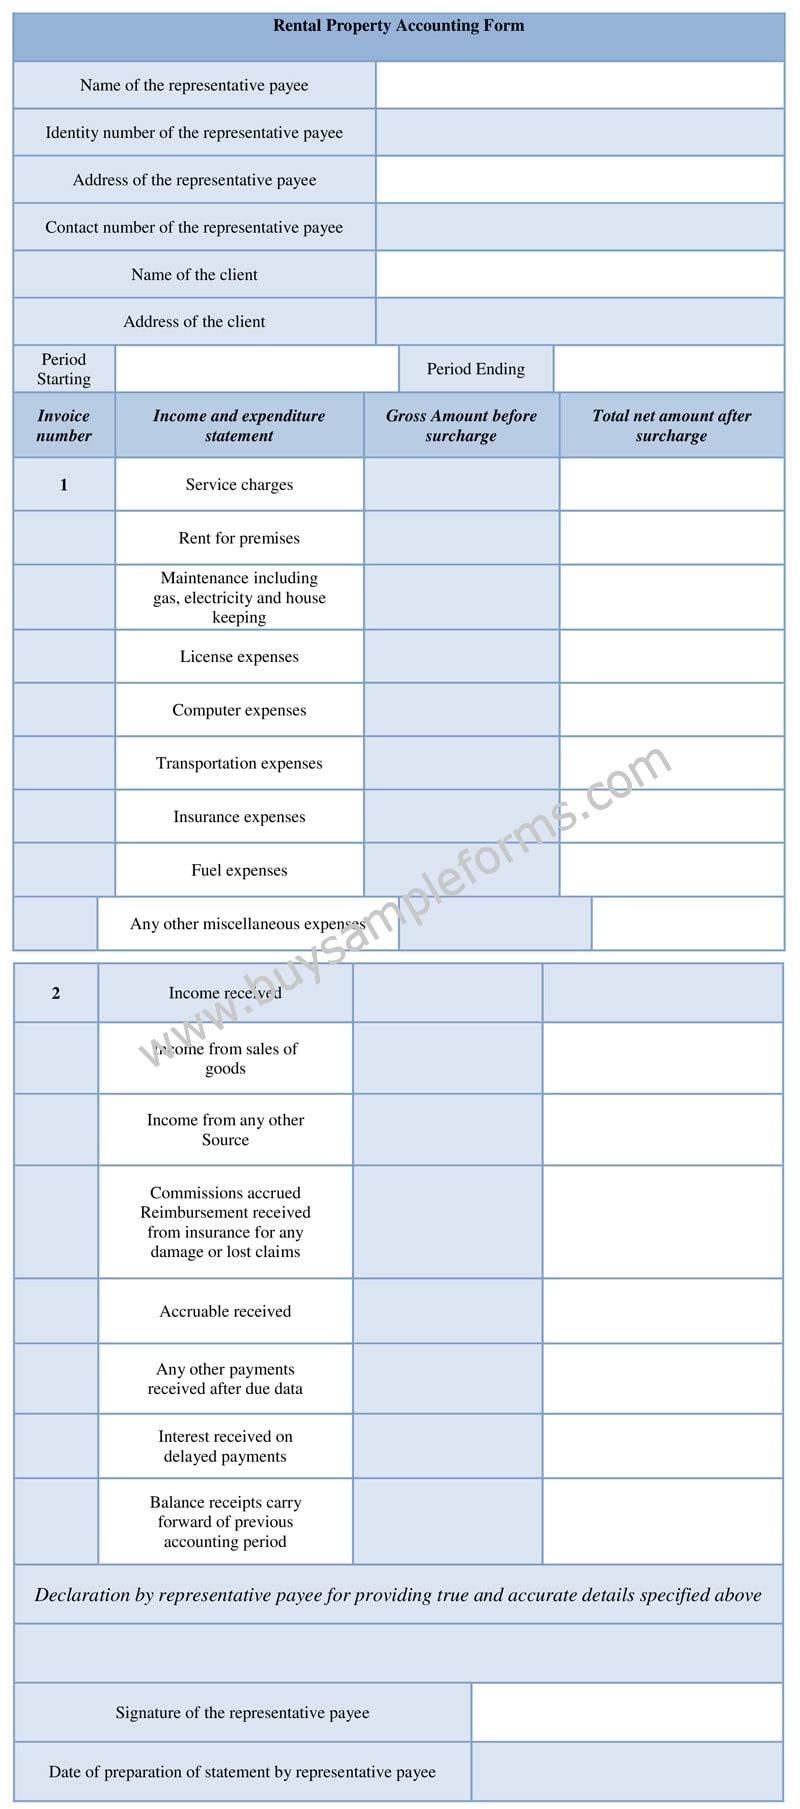 Printable Representative Payee Accounting Form Template Online